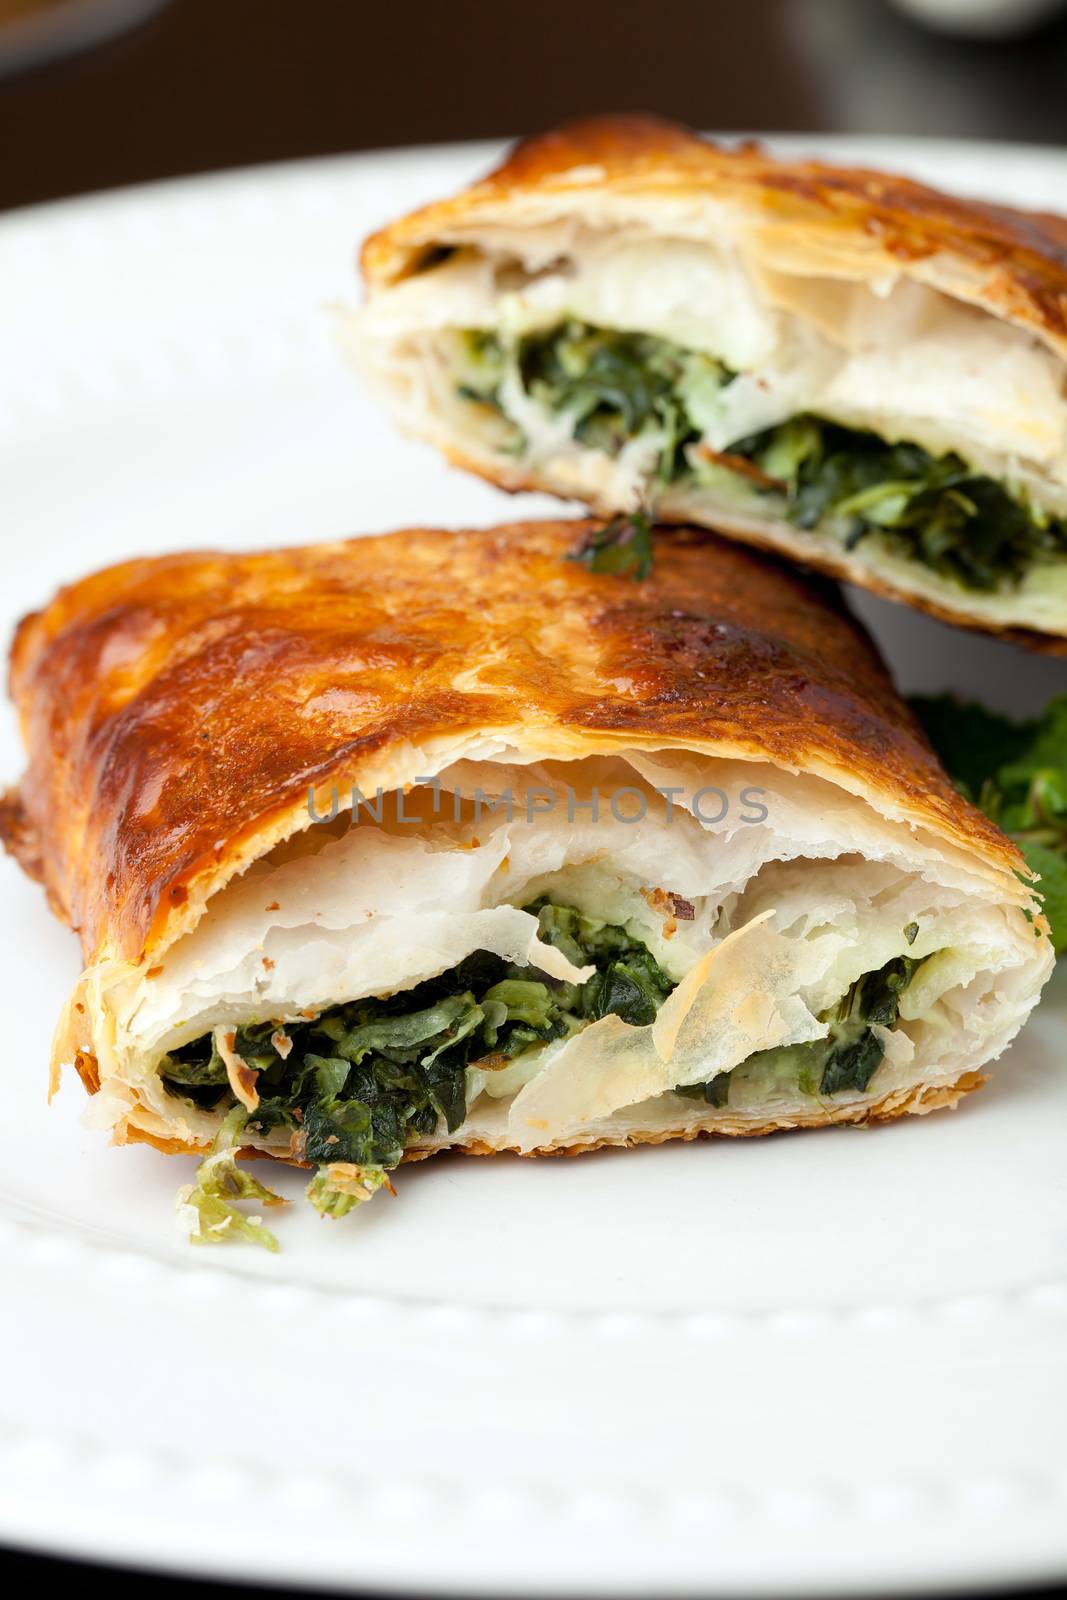 Greek spanakopita or spinach pie on a white plate.  Shallow depth of field.